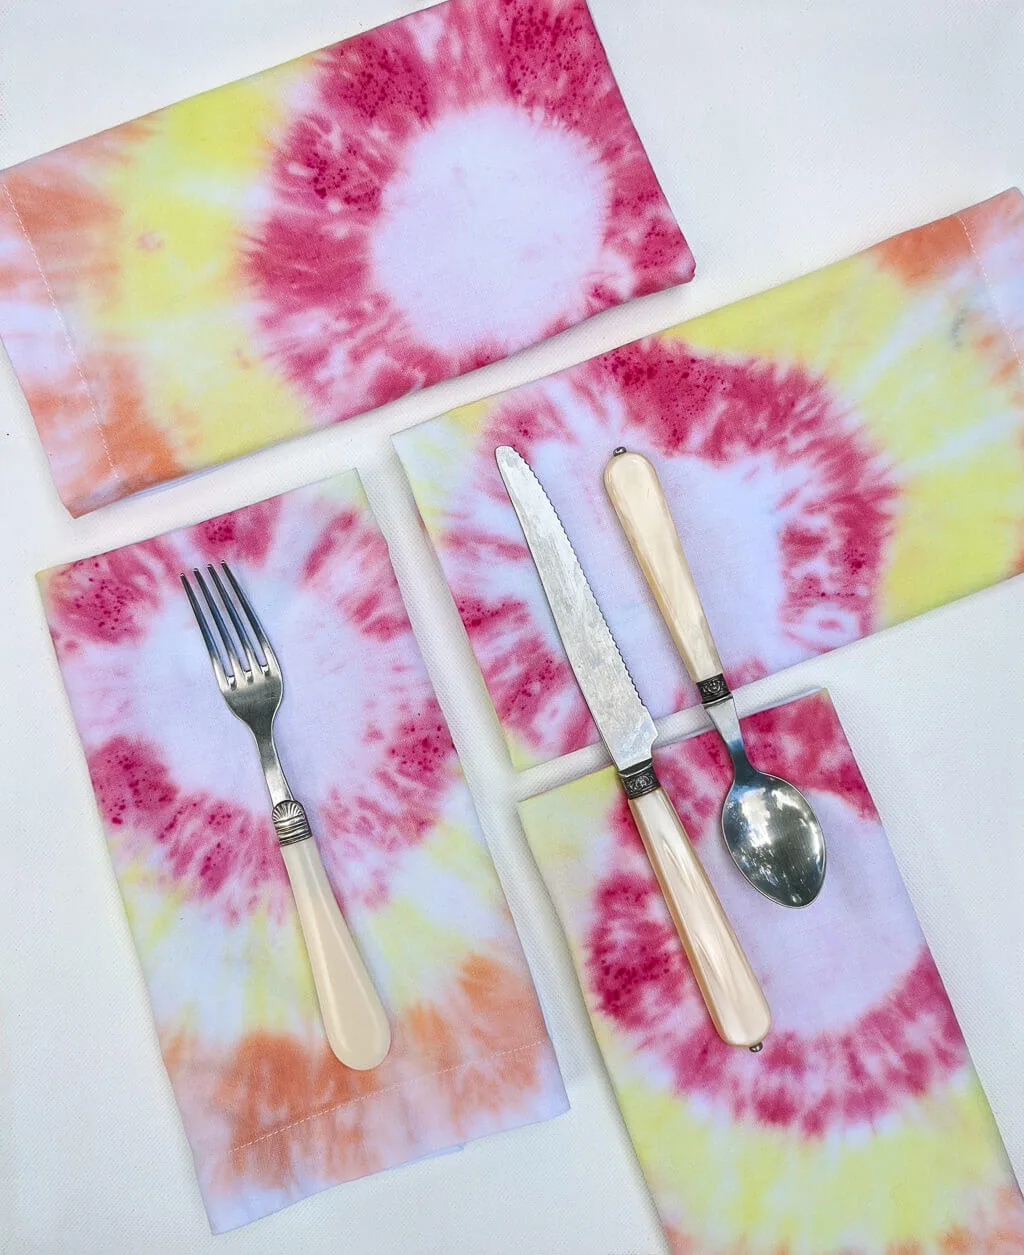 DIY tie-dye cloth napkins in yellow, red, and orange